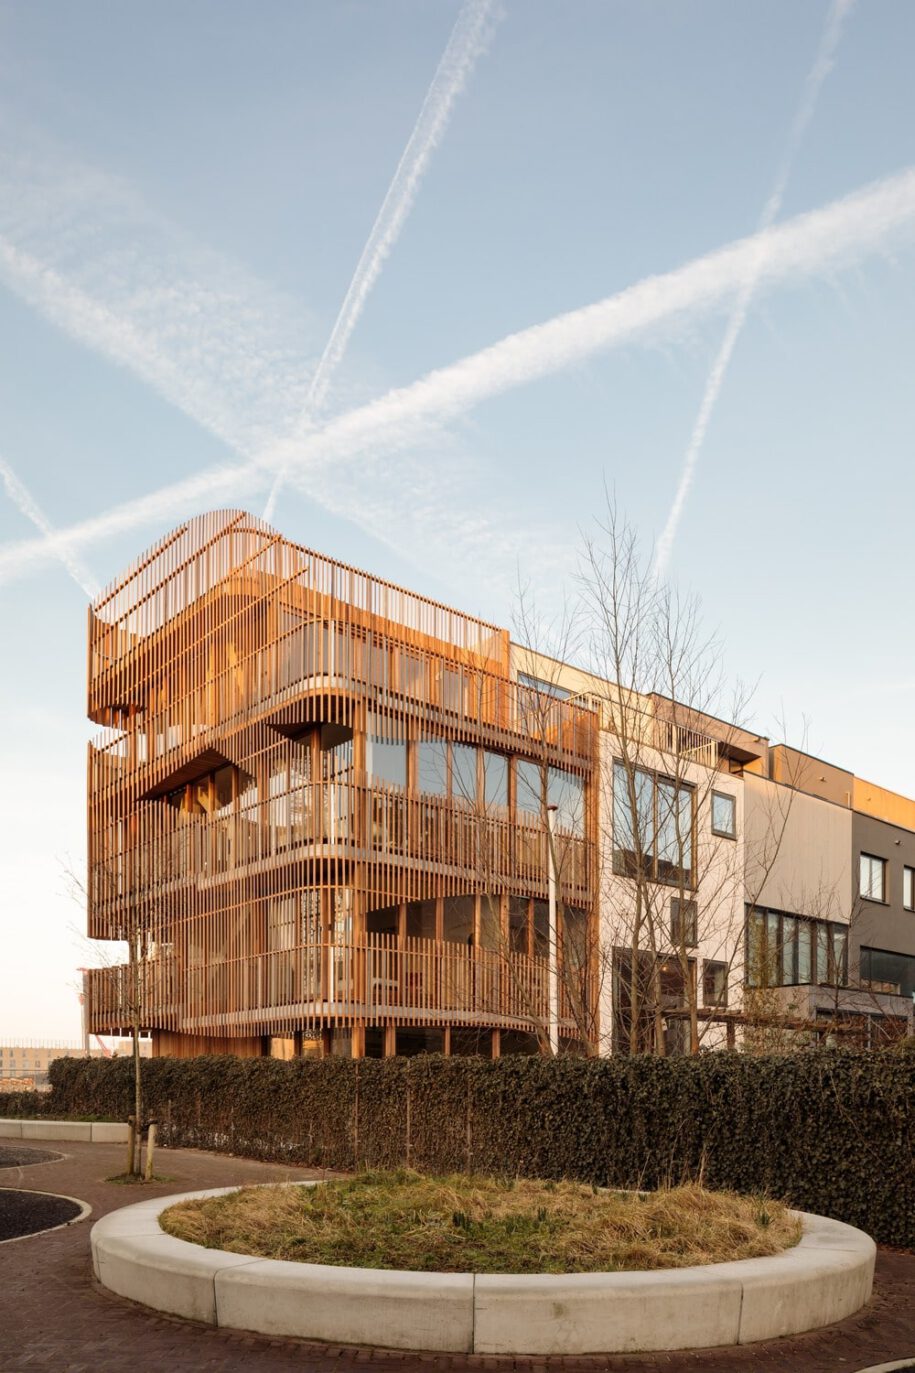 Archisearch Freebooter, Biophilic House in Amsterdam by GG-loop architecture practice wins the 